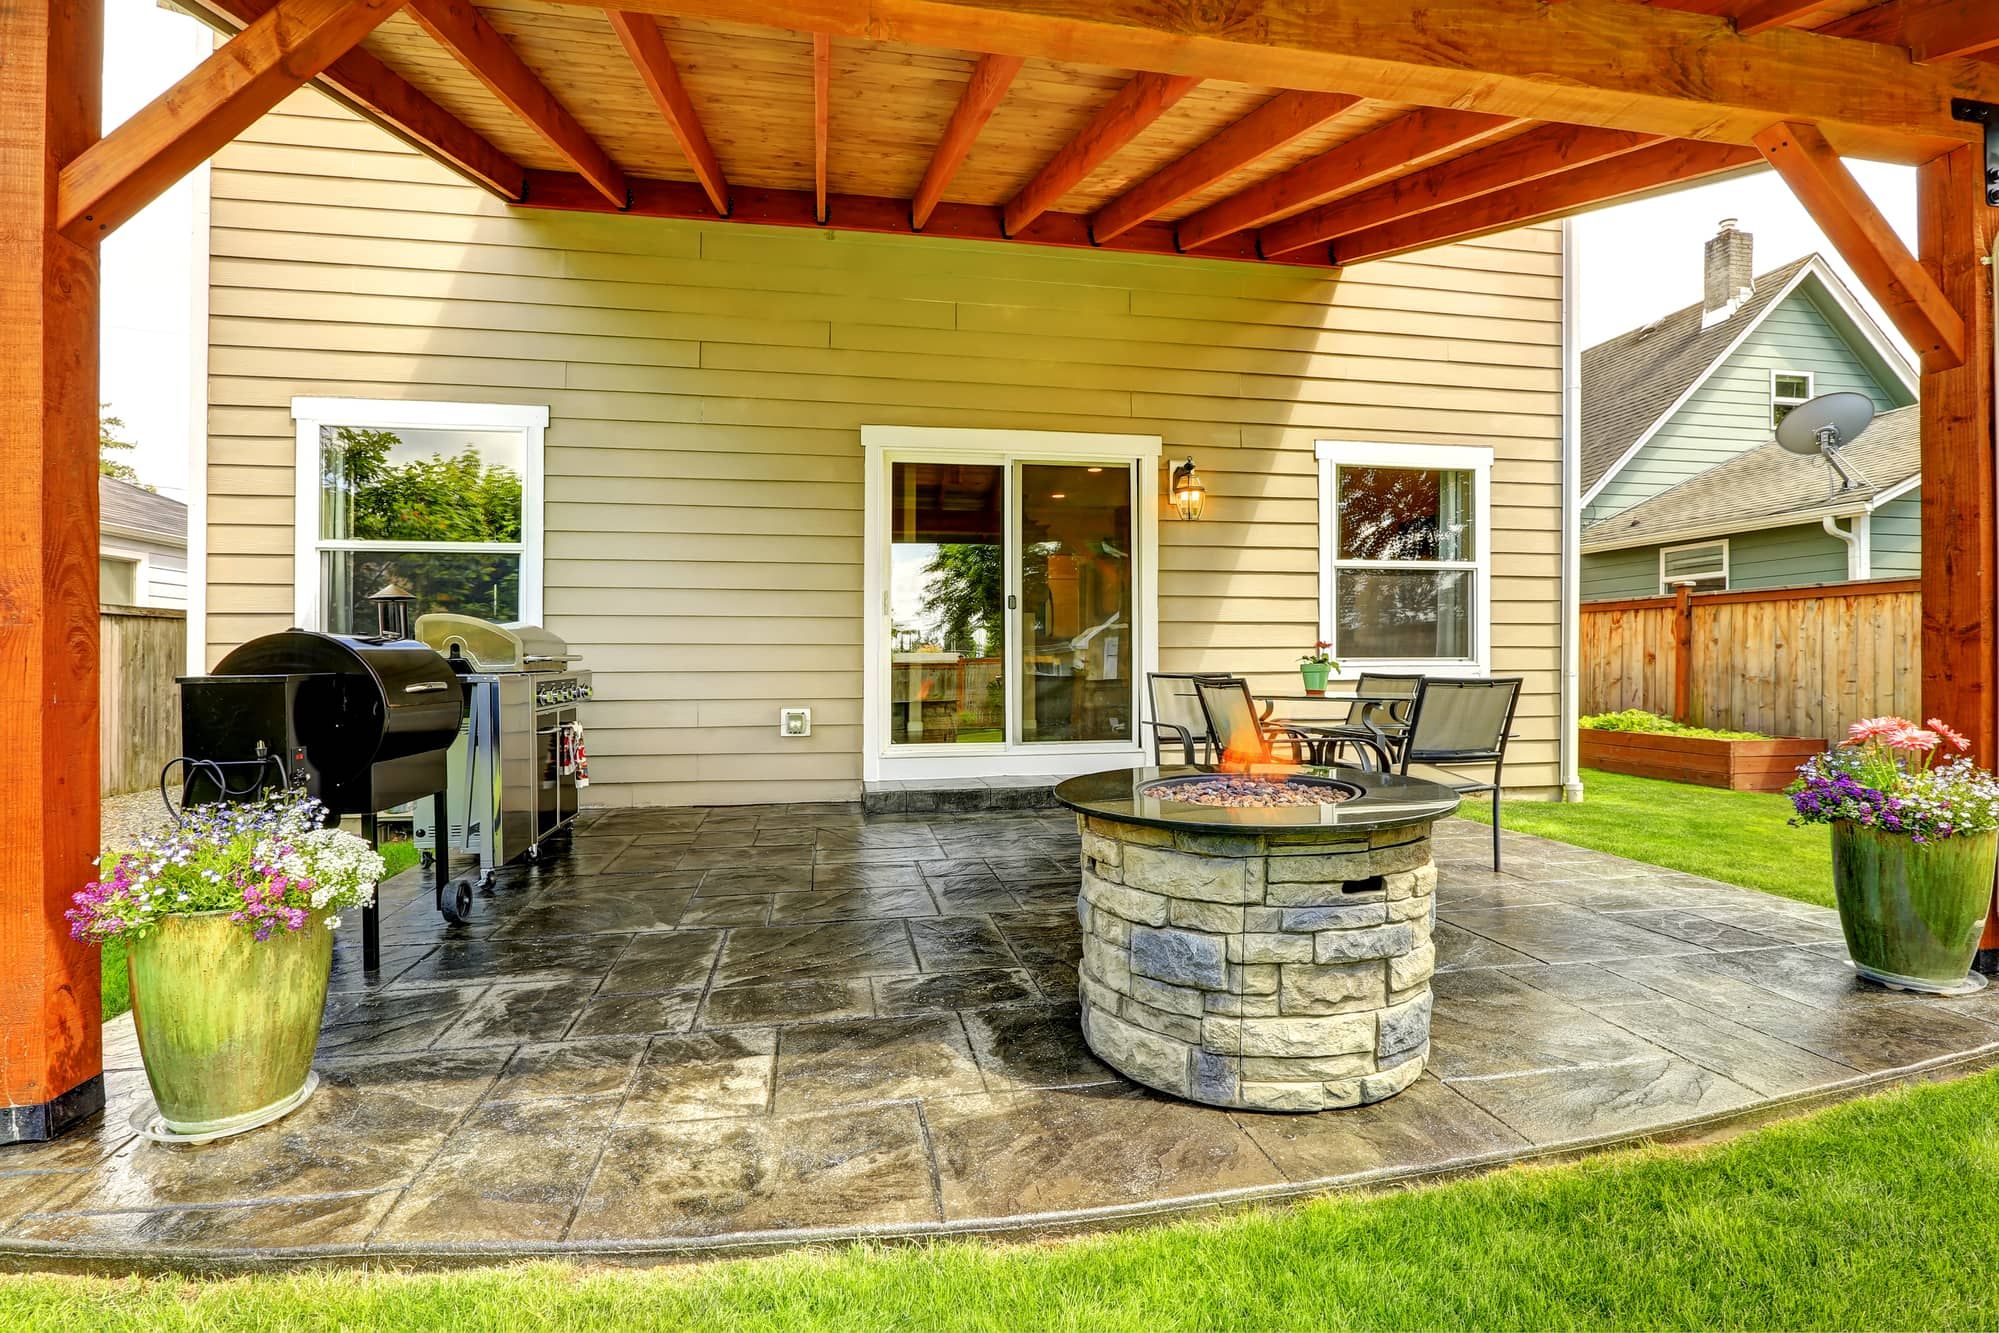 Pergola with patio area. Tile floor decorated with flower pots. Stone trimmed fire pit, patio table set and barbecue